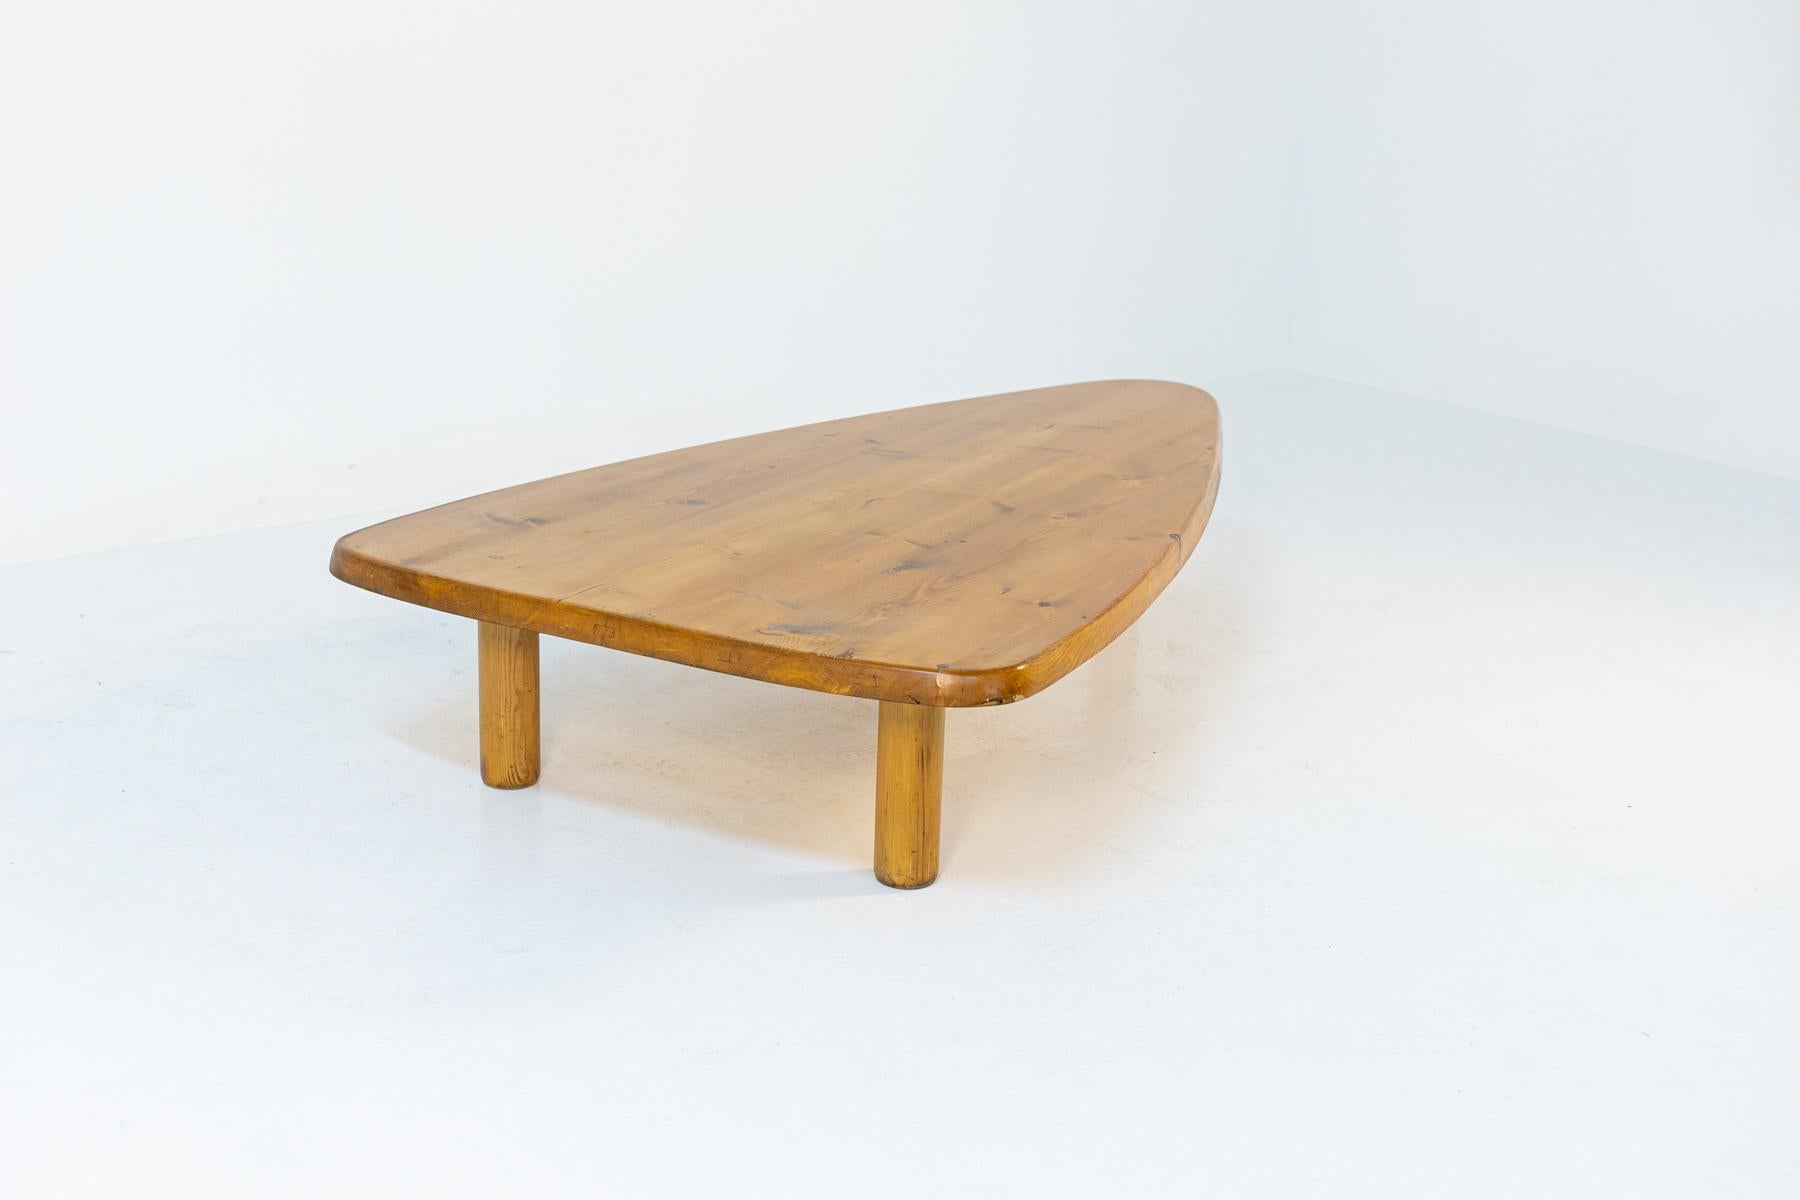 Wonderful large wooden coffee table of fine French manufacture from the 1950s.
The coffee table has a beautiful elongated triangular shape. Made entirely of light-coloured treated pine wood, it adds a touch of warmth to the area in which it is